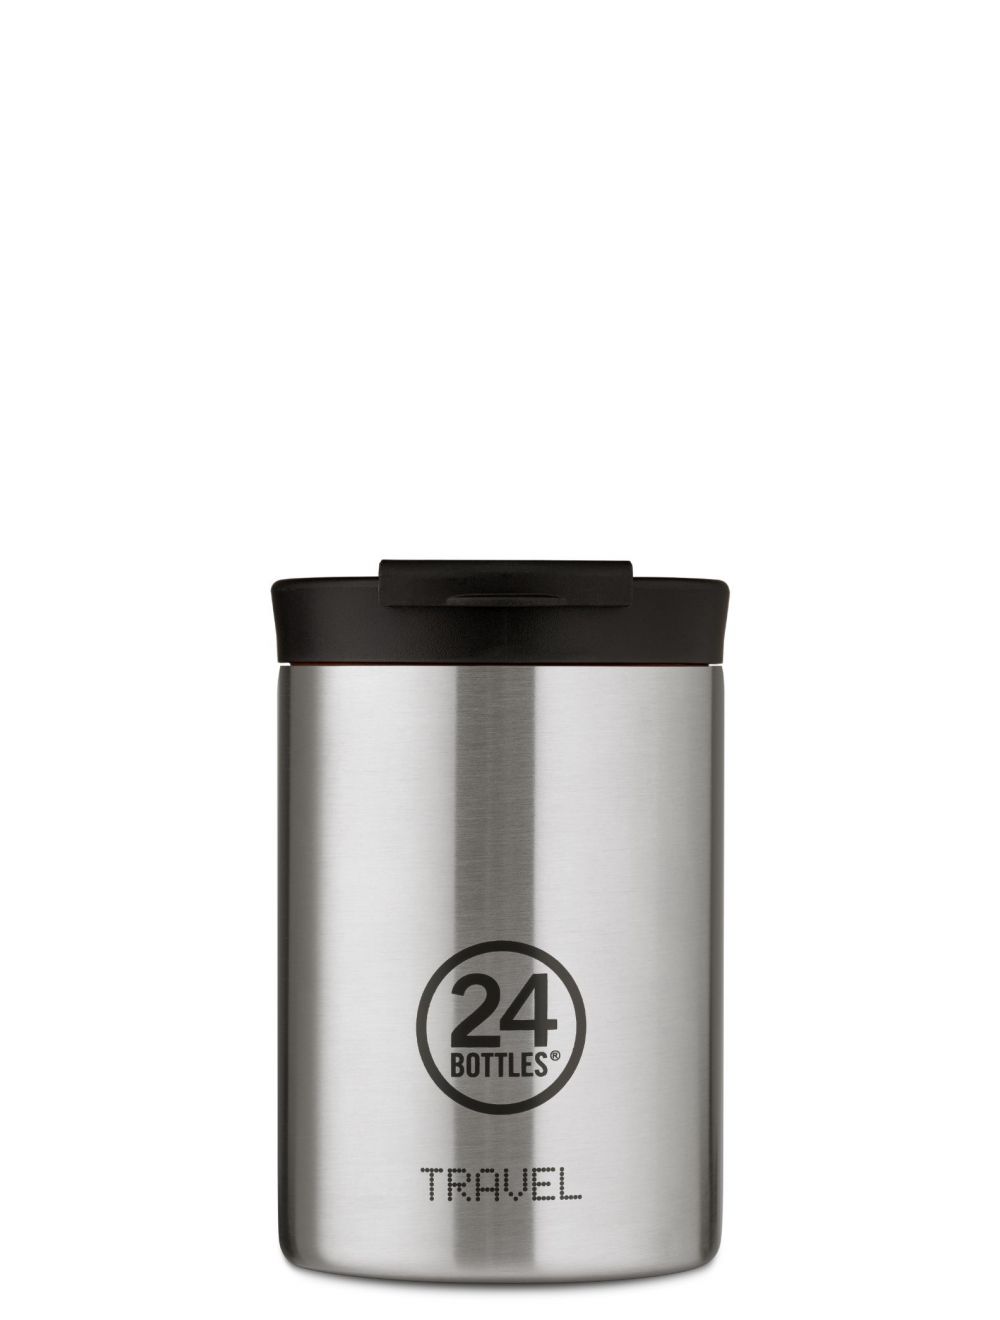 Travel Tumbler Double Walled Insulated Stainless Steel 350ml-24B-TT-350-STL